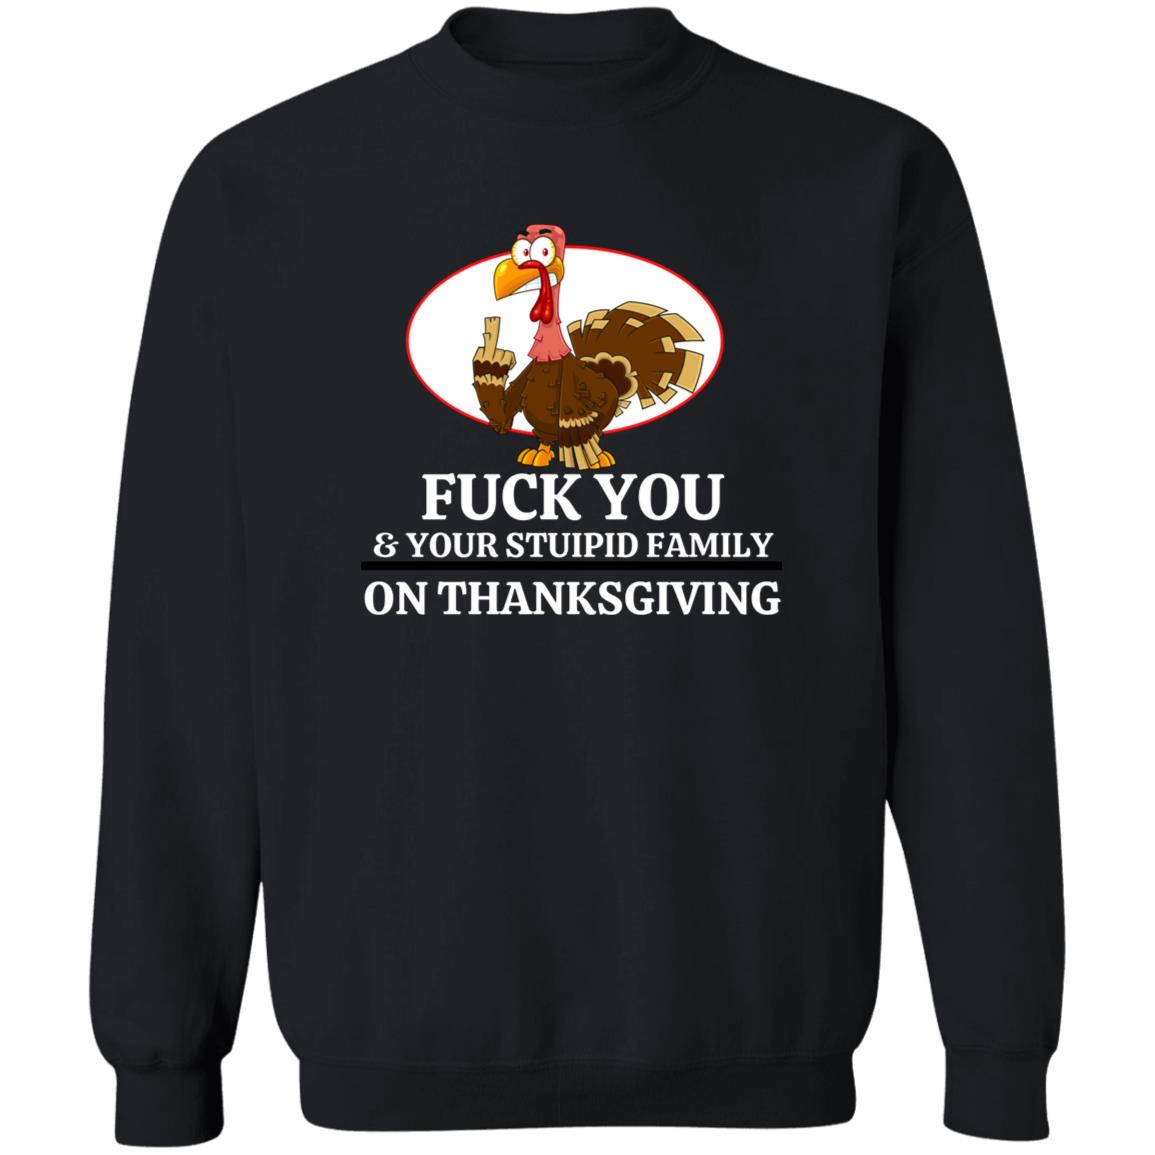 Anti-Social Thanksgiving Pull Over Sweat Shirt, Punk Rock Angry Turkey Offensive Holiday Shirt